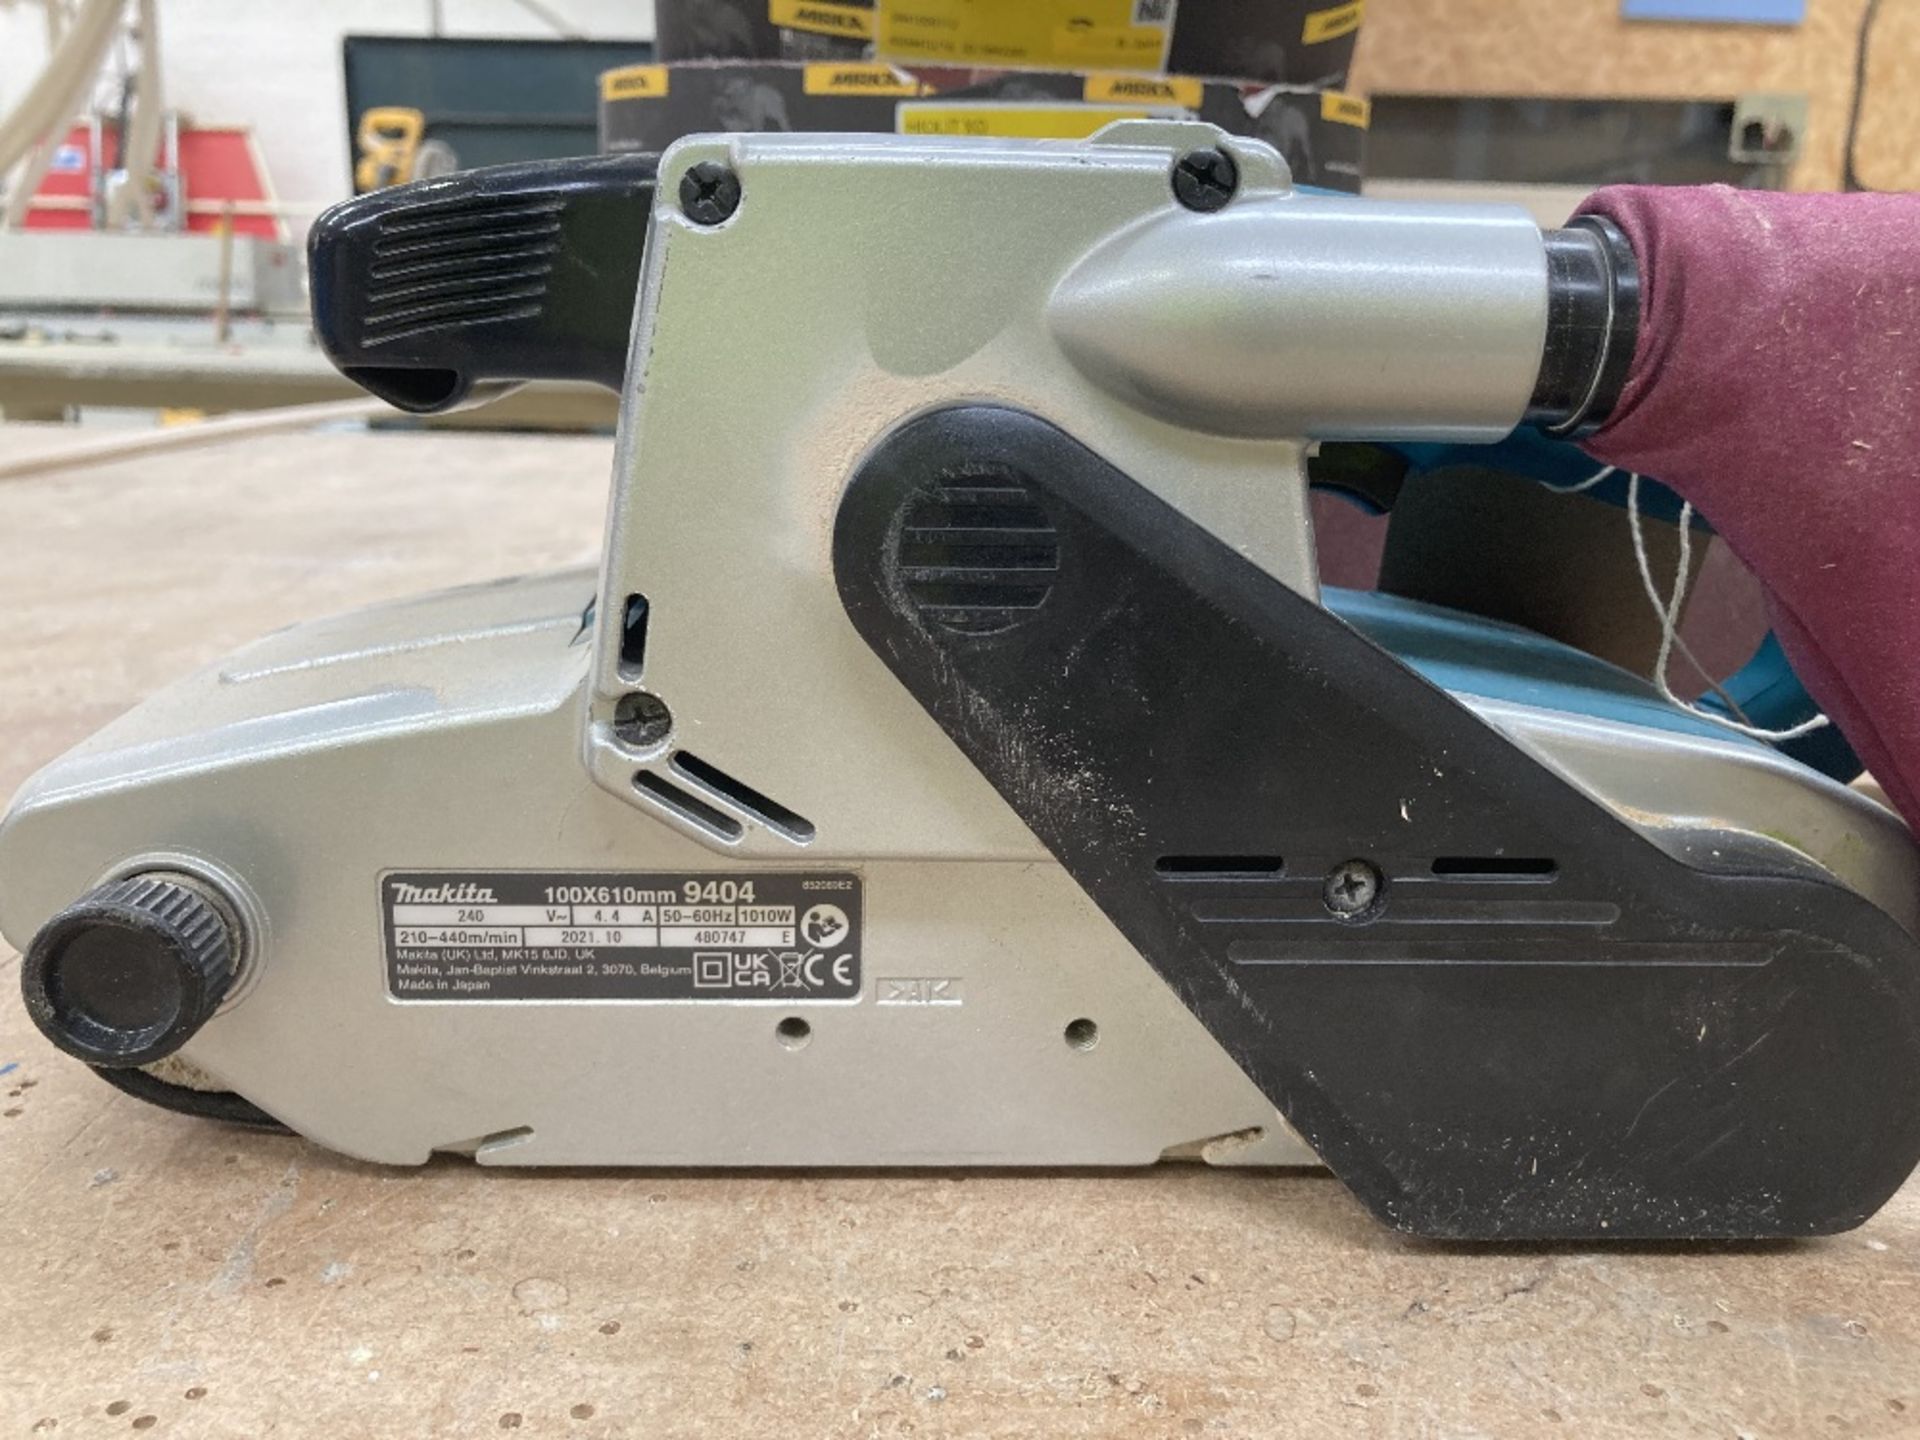 Makita 100x610mm 240v Planer Complete with Spare Sanding Belts - Image 5 of 9